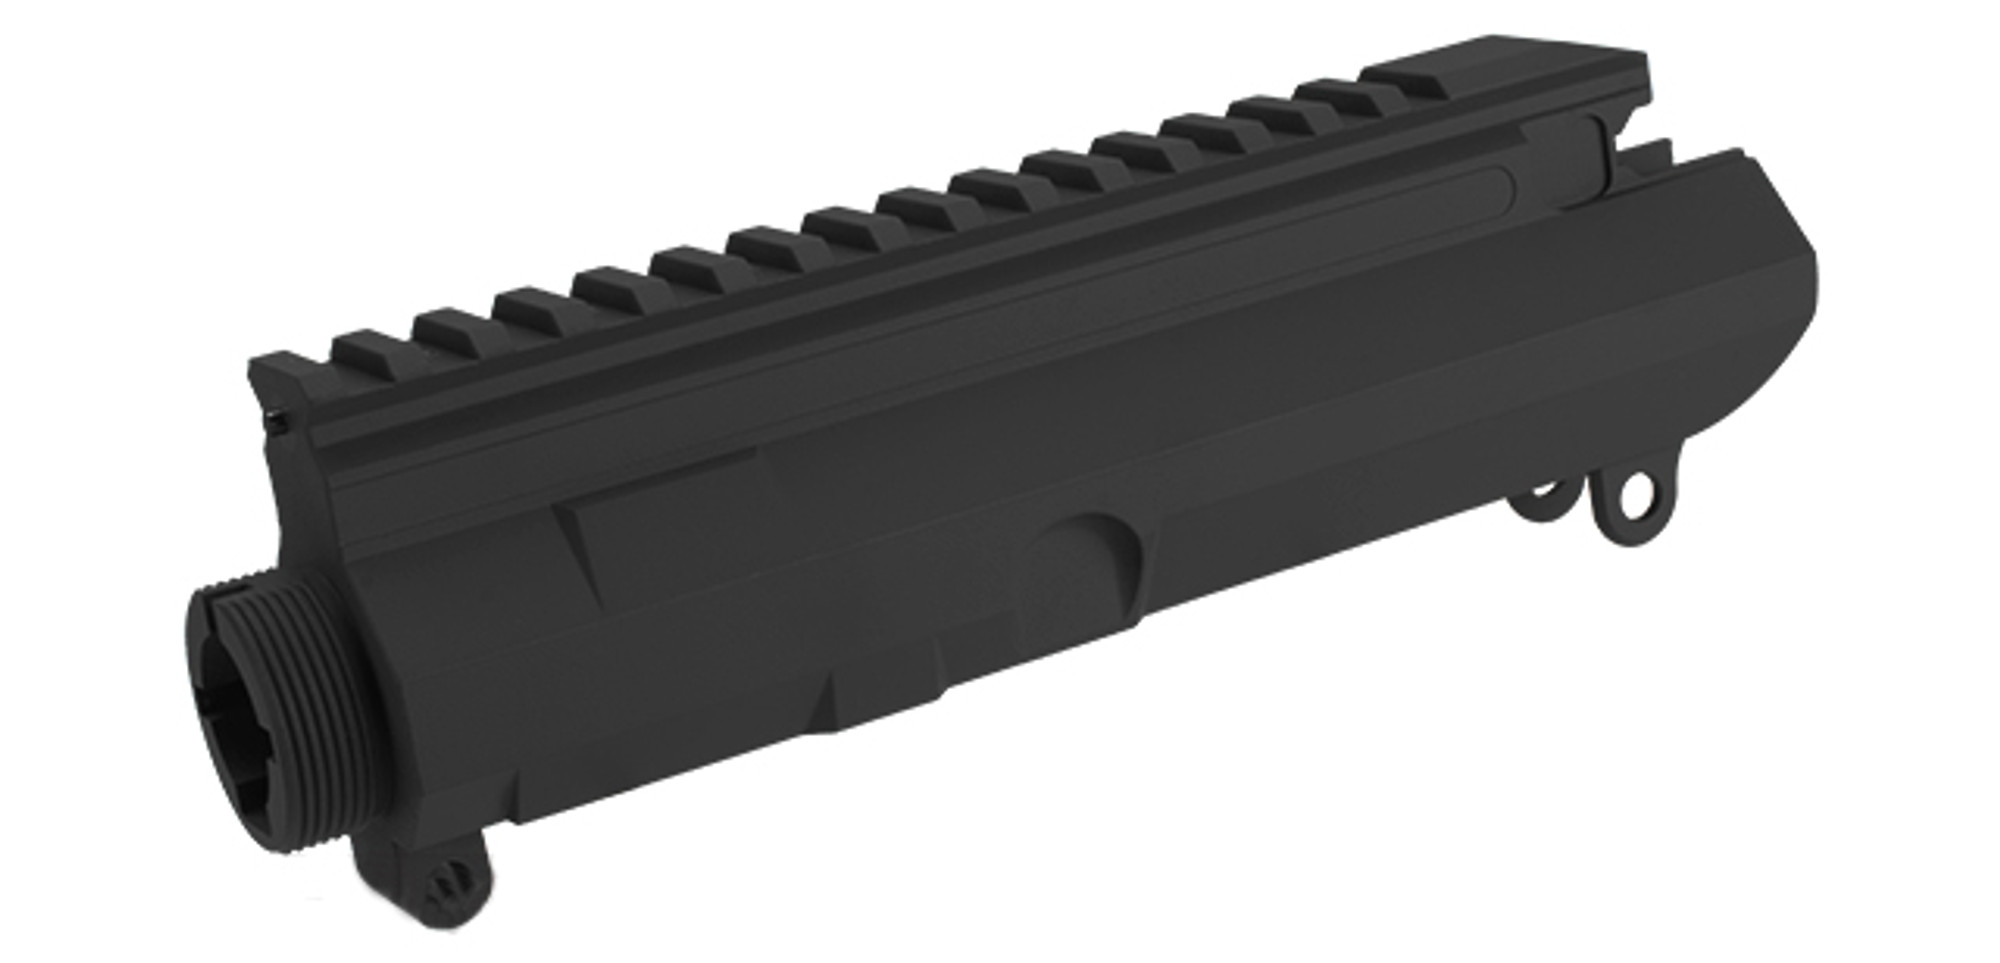 ICS Airsoft MK3 Full Metal Upper Receiver with Dust Cover - Black